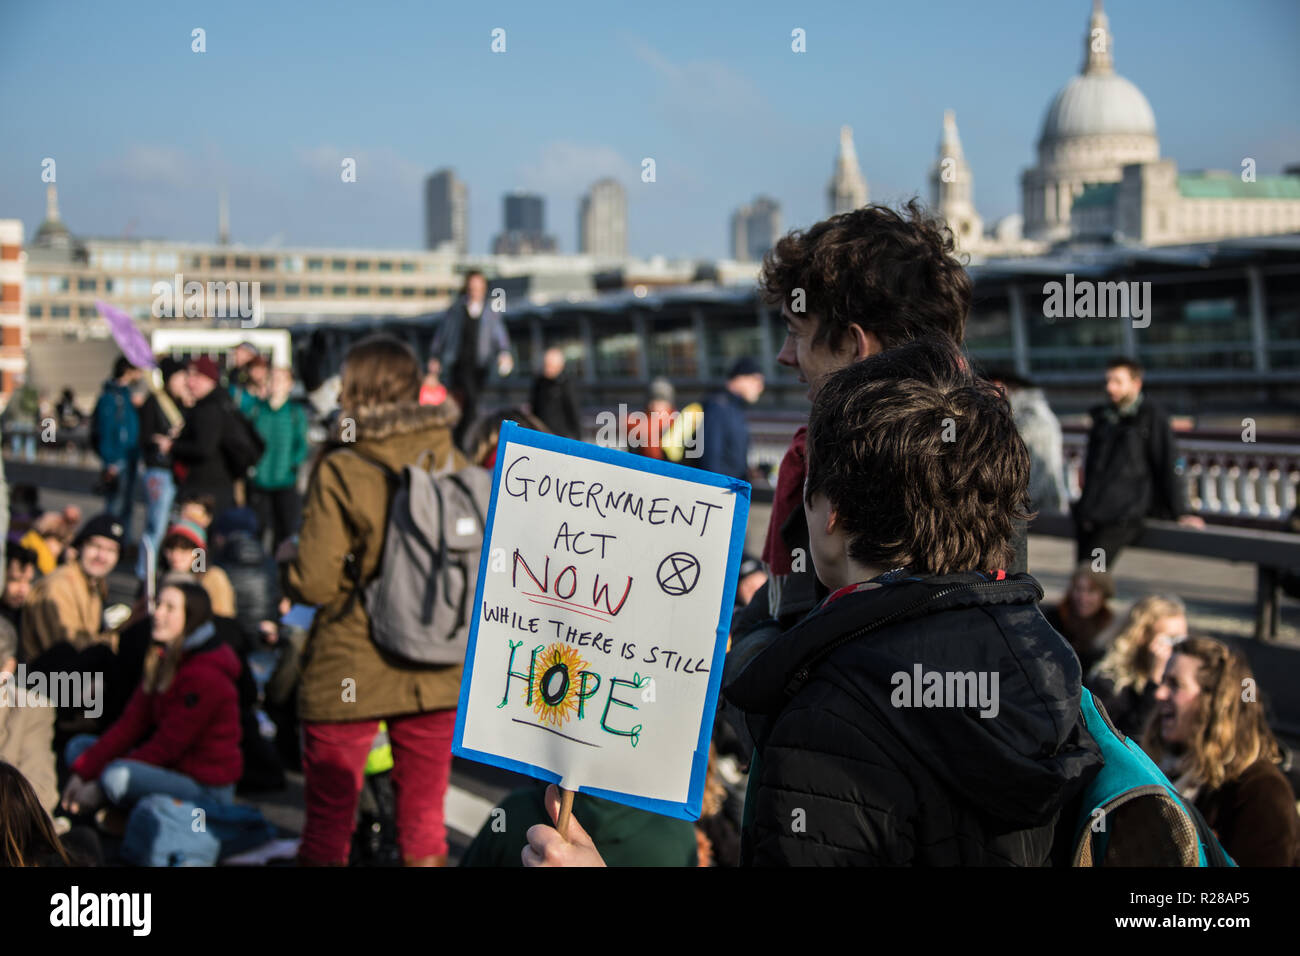 London, UK. 17th Nov, 2018. Blackfriars Bridge, climate protesters demonstrated in central London with a blockage of five London bridges. David Rowe/ Alamy Live News. Stock Photo